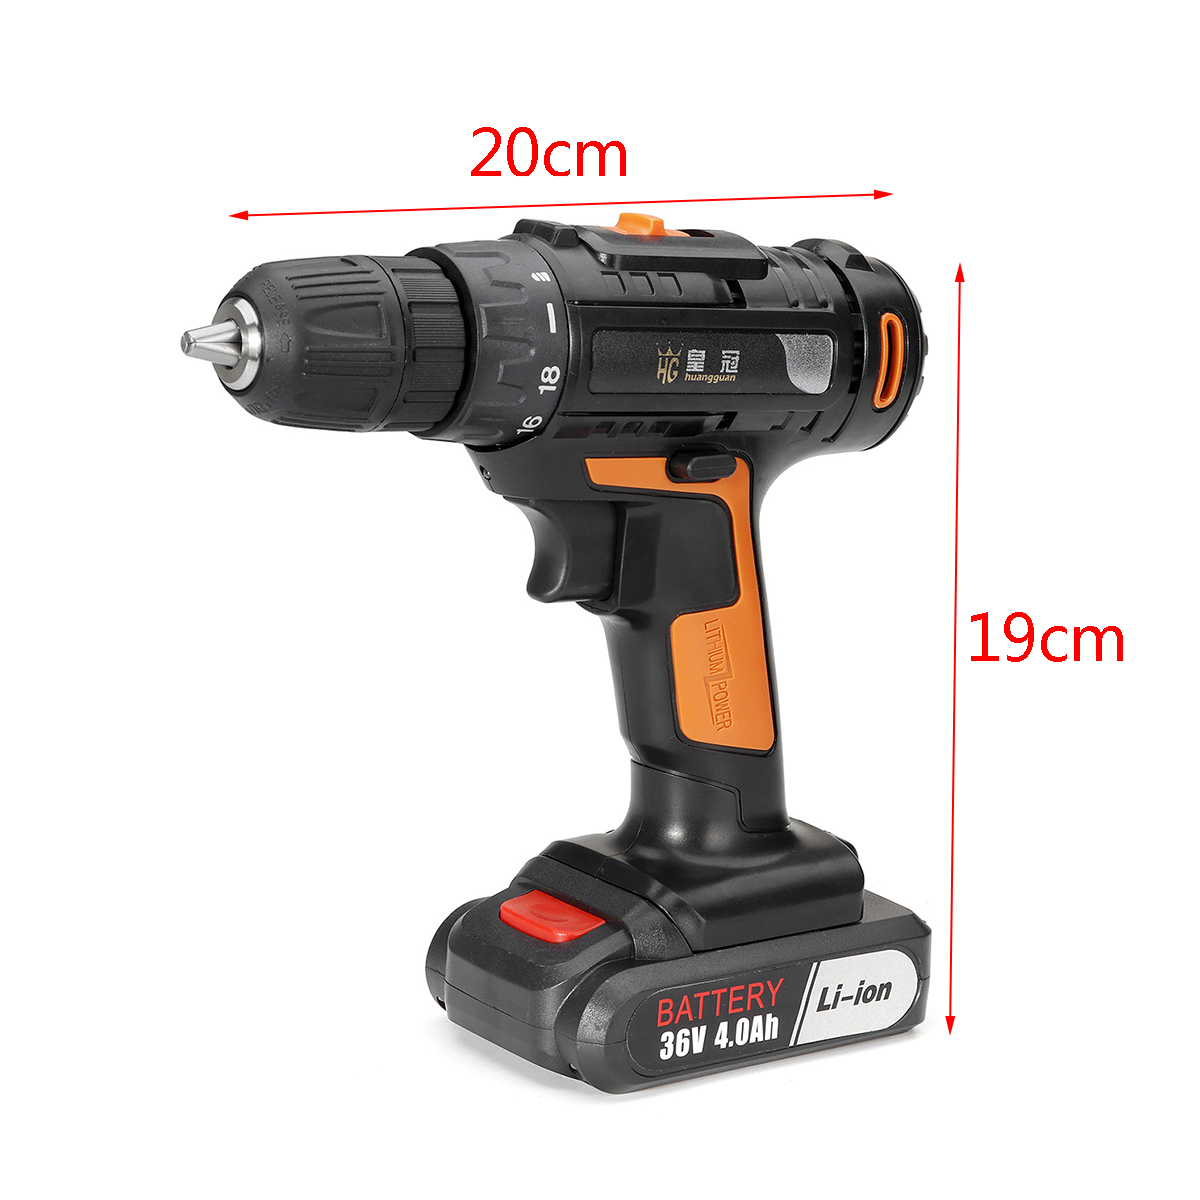 48V-Electric-Drill-Cordless-Rechargeable-Screwdriver-Drill-Screw-Set-Repair-Tools-Kit-1501700-8